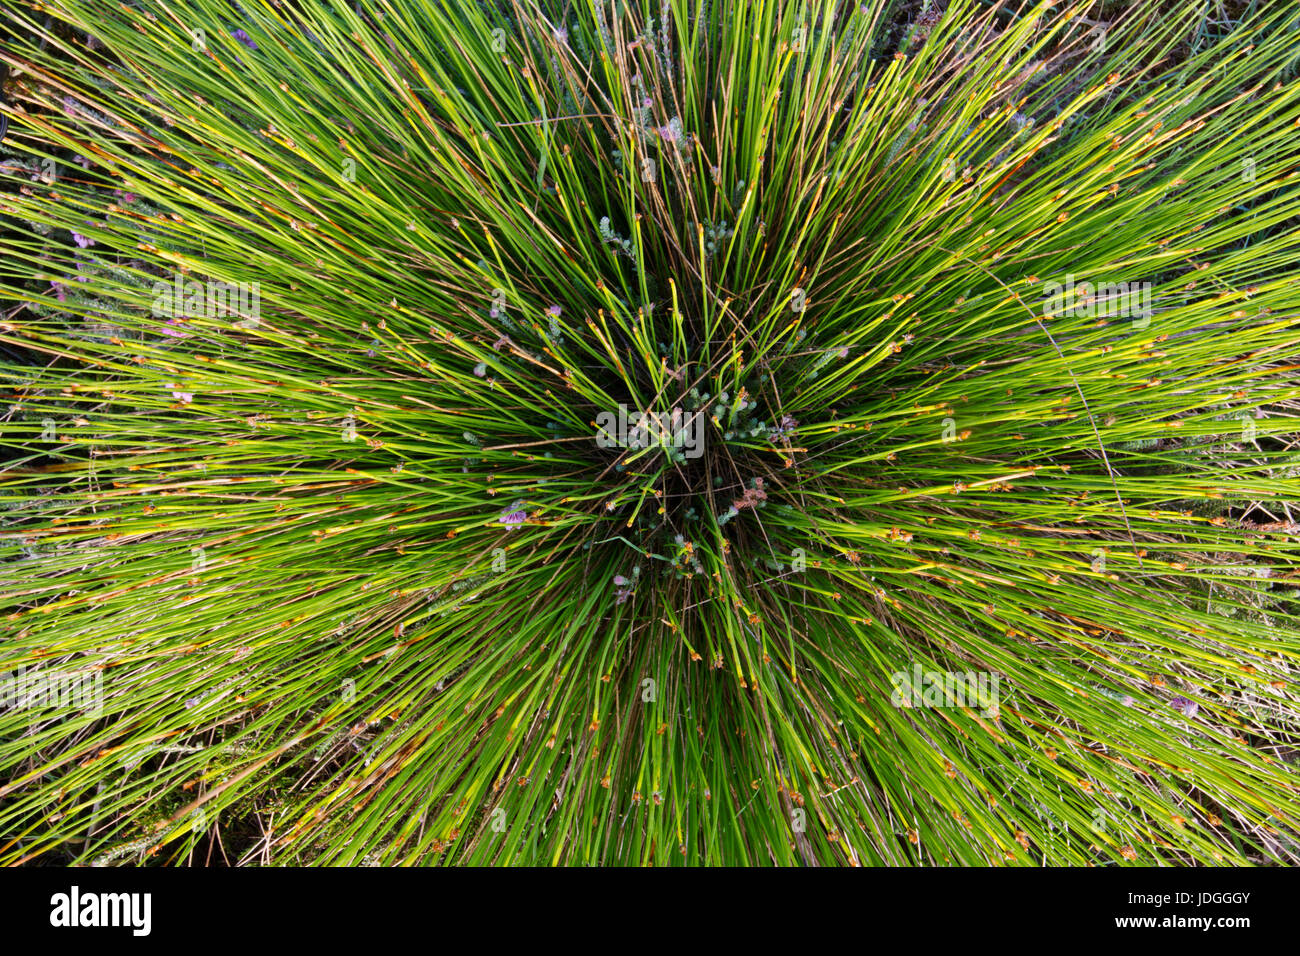 Top view of Deergrass or Tufted bulrush Stock Photo